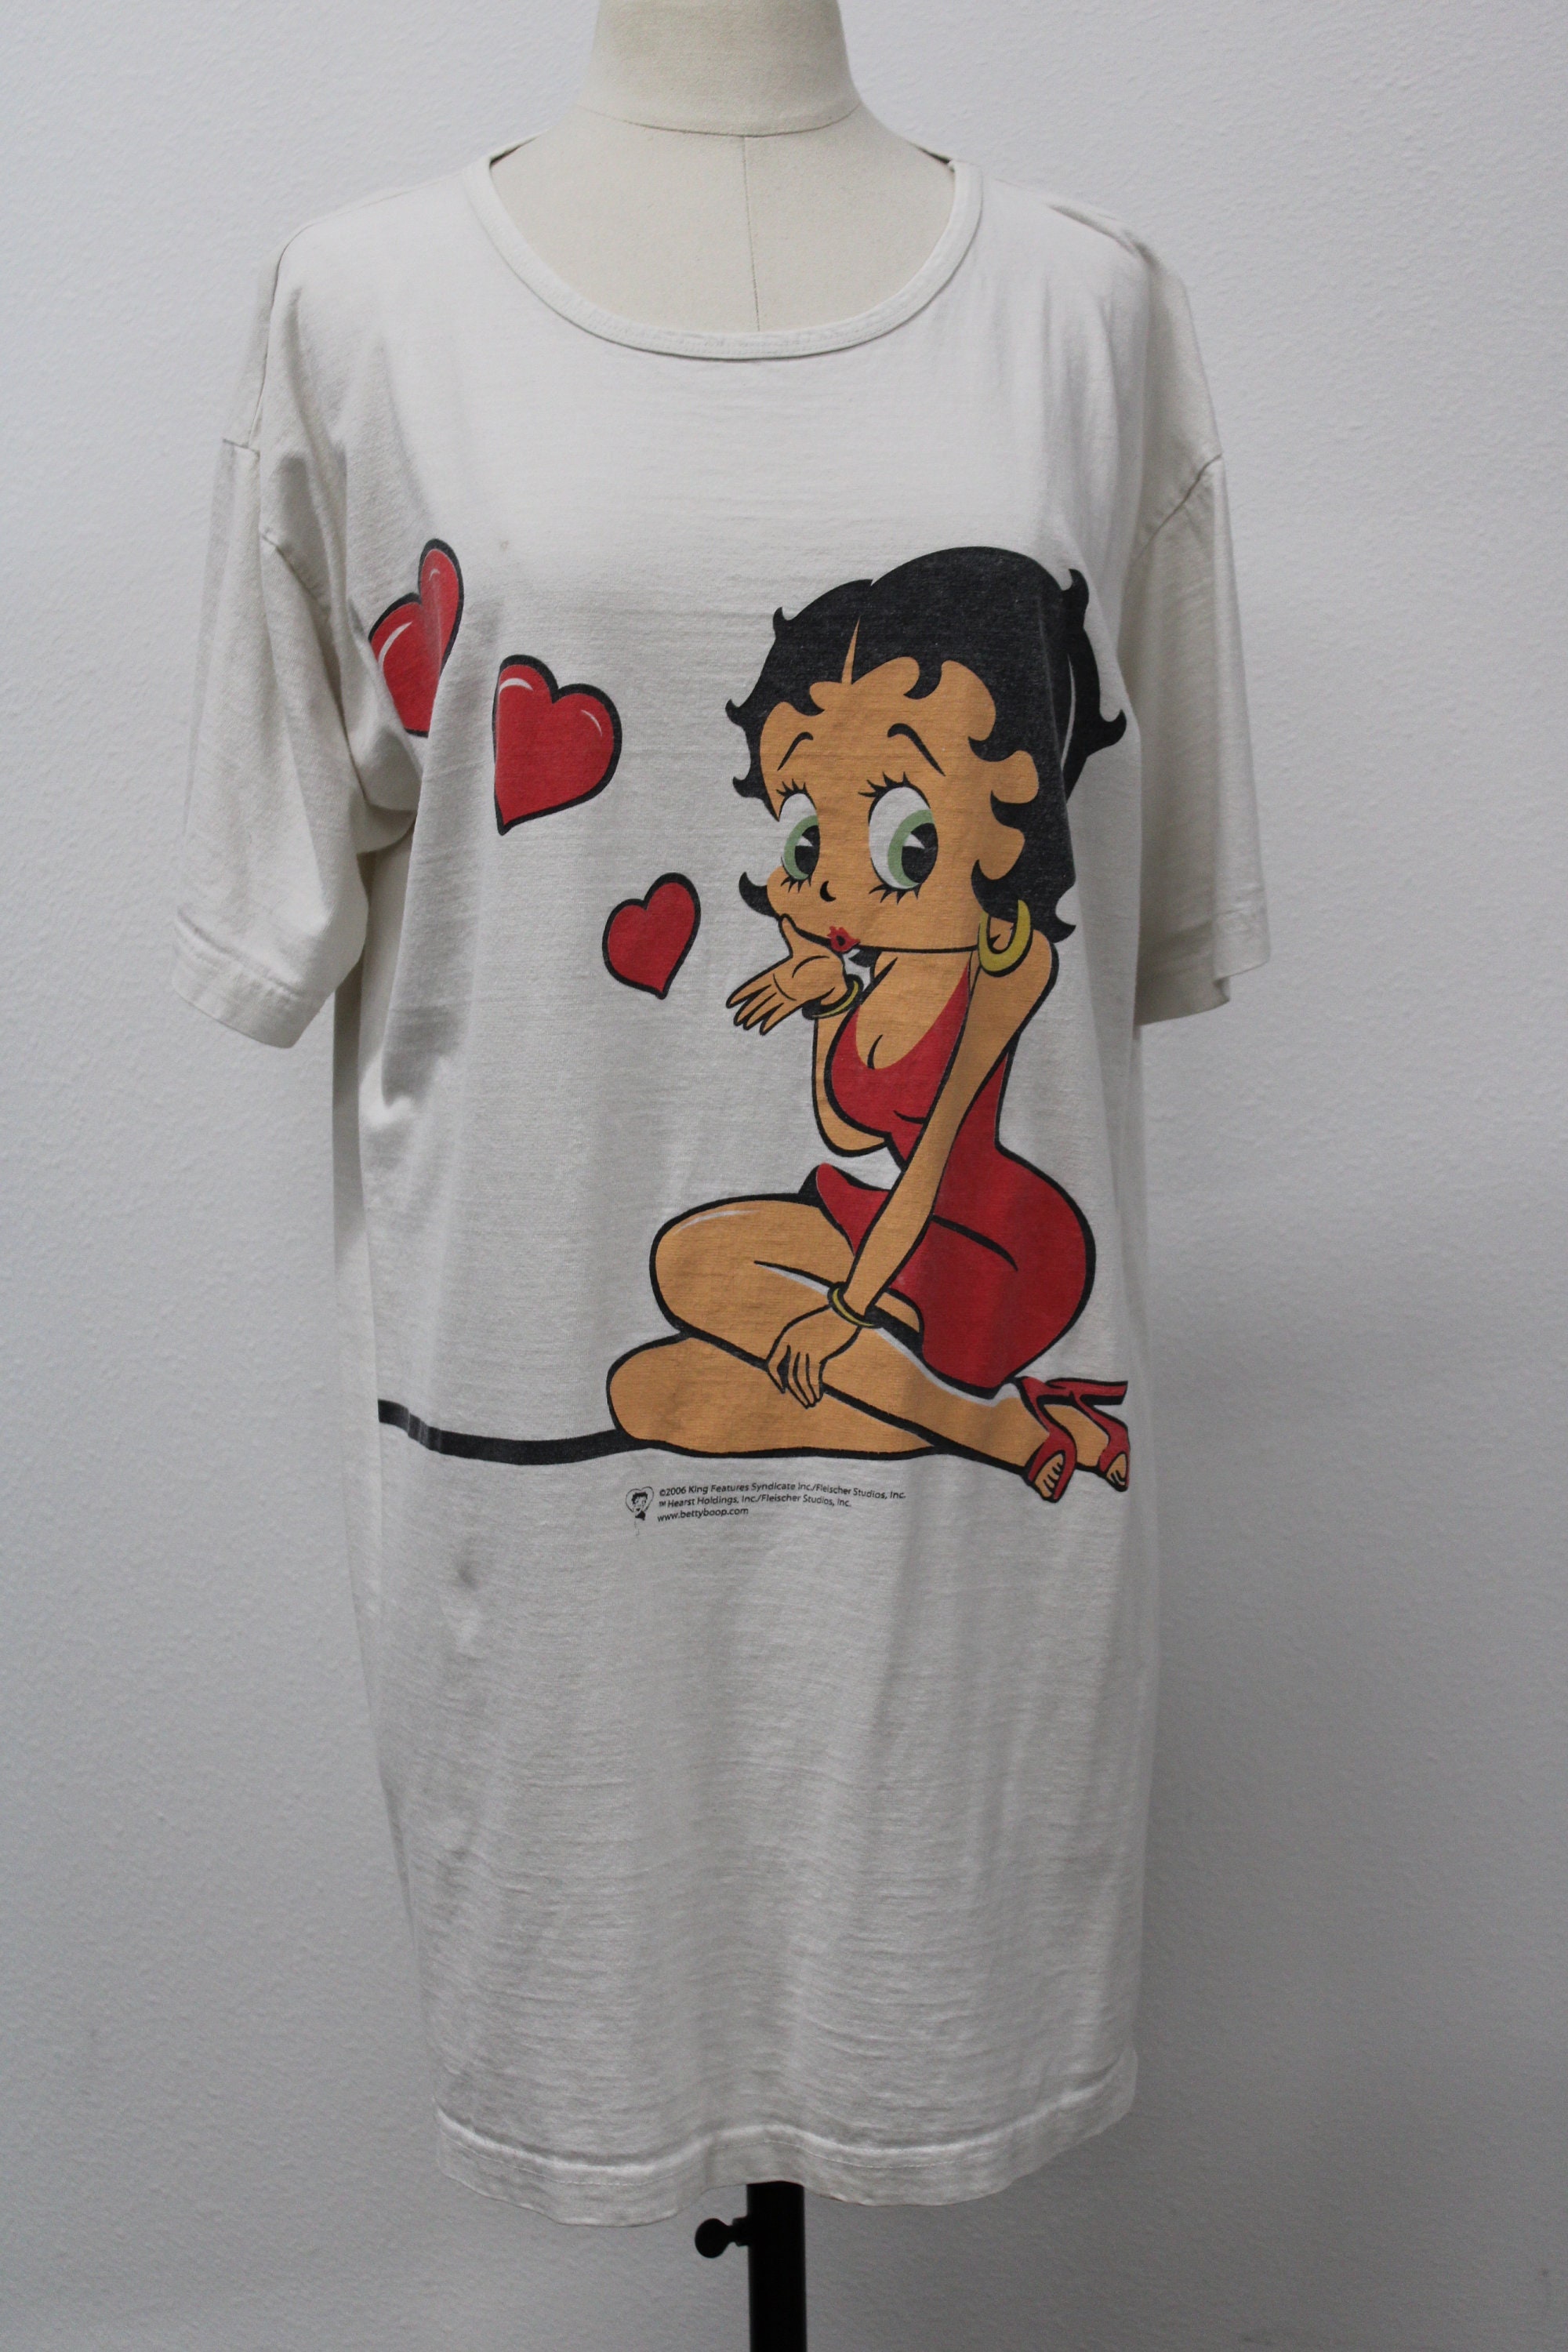 Betty Boop Graphic T-shirt Long Pijama White Red Dress Puppy - Etsy